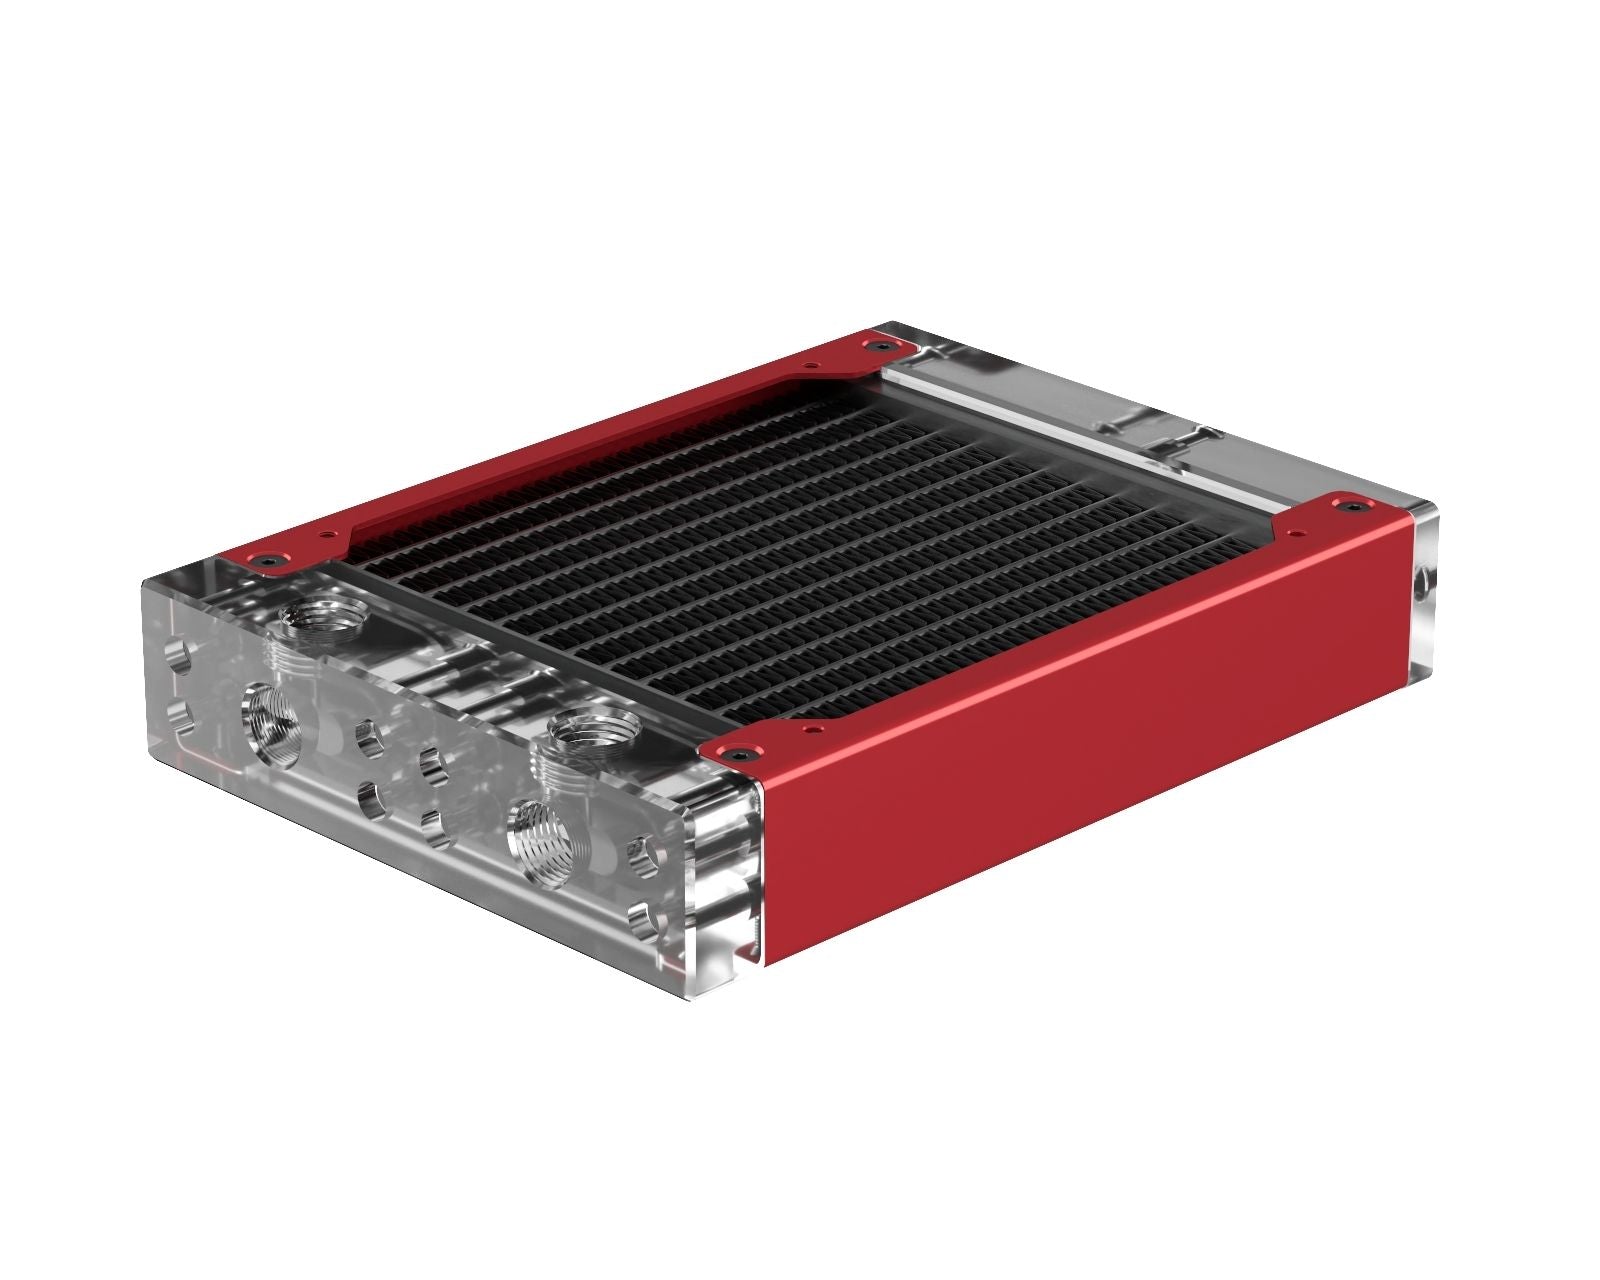 PrimoChill 120SL (30mm) EXIMO Modular Radiator, Clear Acrylic, 1x120mm, Single Fan (R-SL-A12) Available in 20+ Colors, Assembled in USA and Custom Watercooling Loop Ready - Candy Red